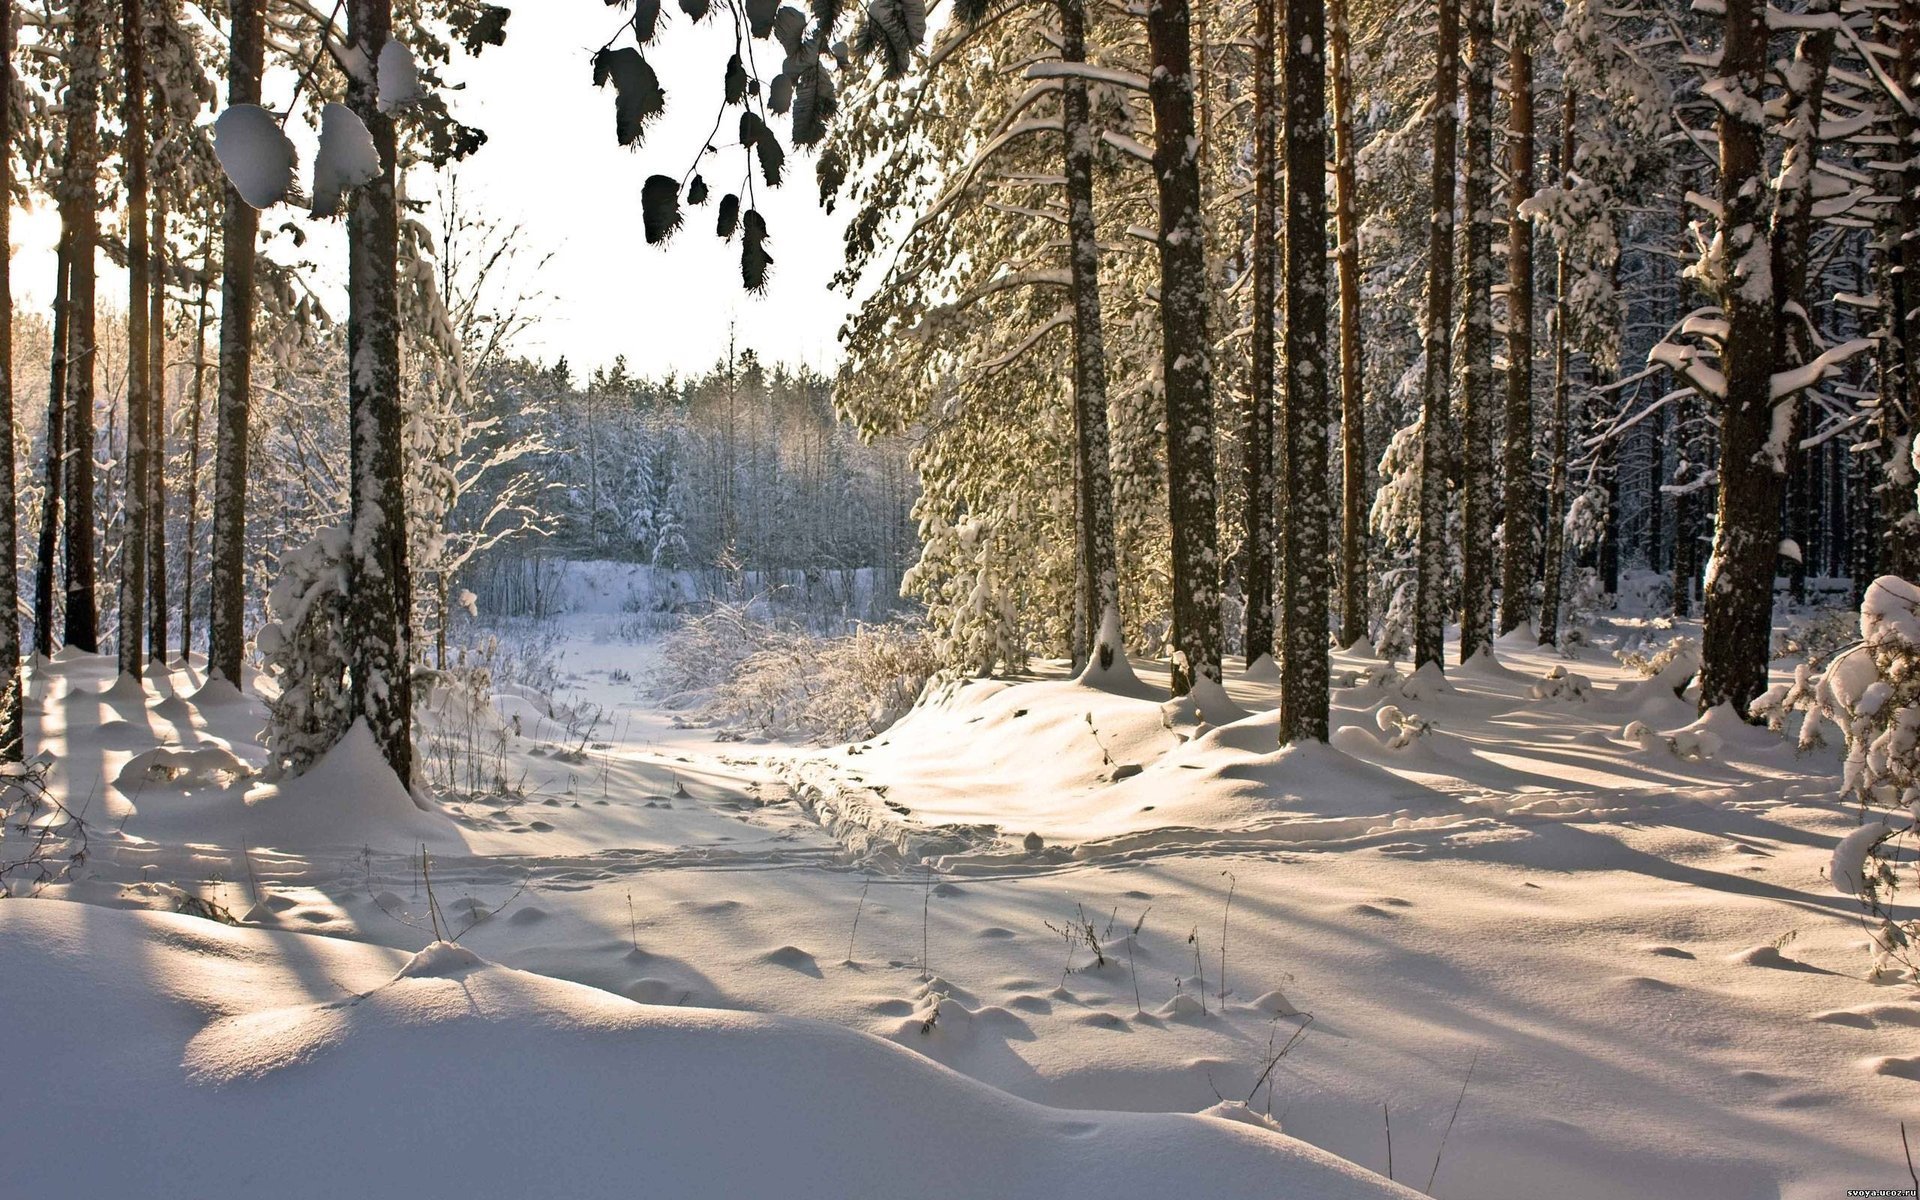 The sun's rays making their way to the path in the winter forest